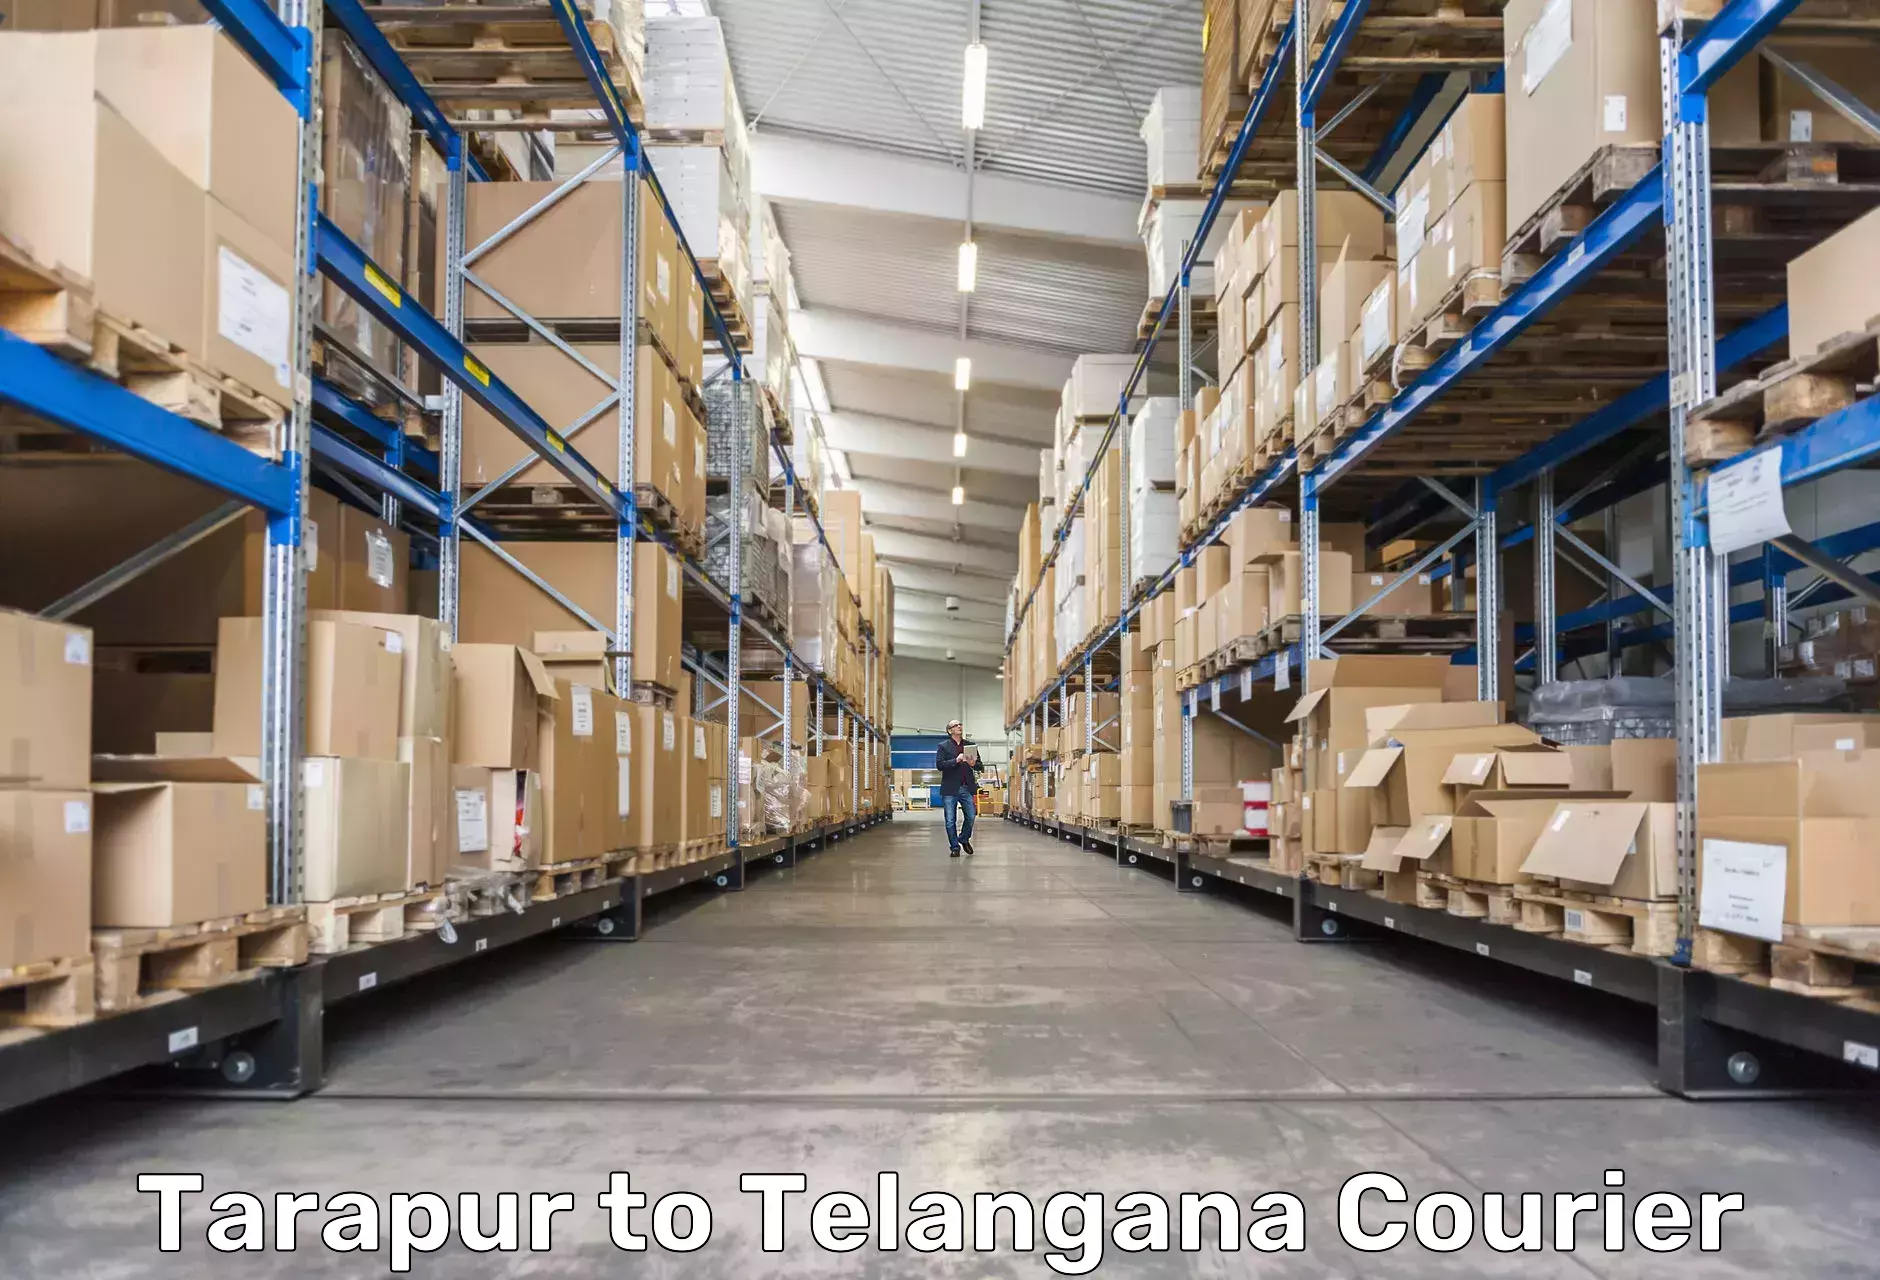 Domestic courier Tarapur to Secunderabad